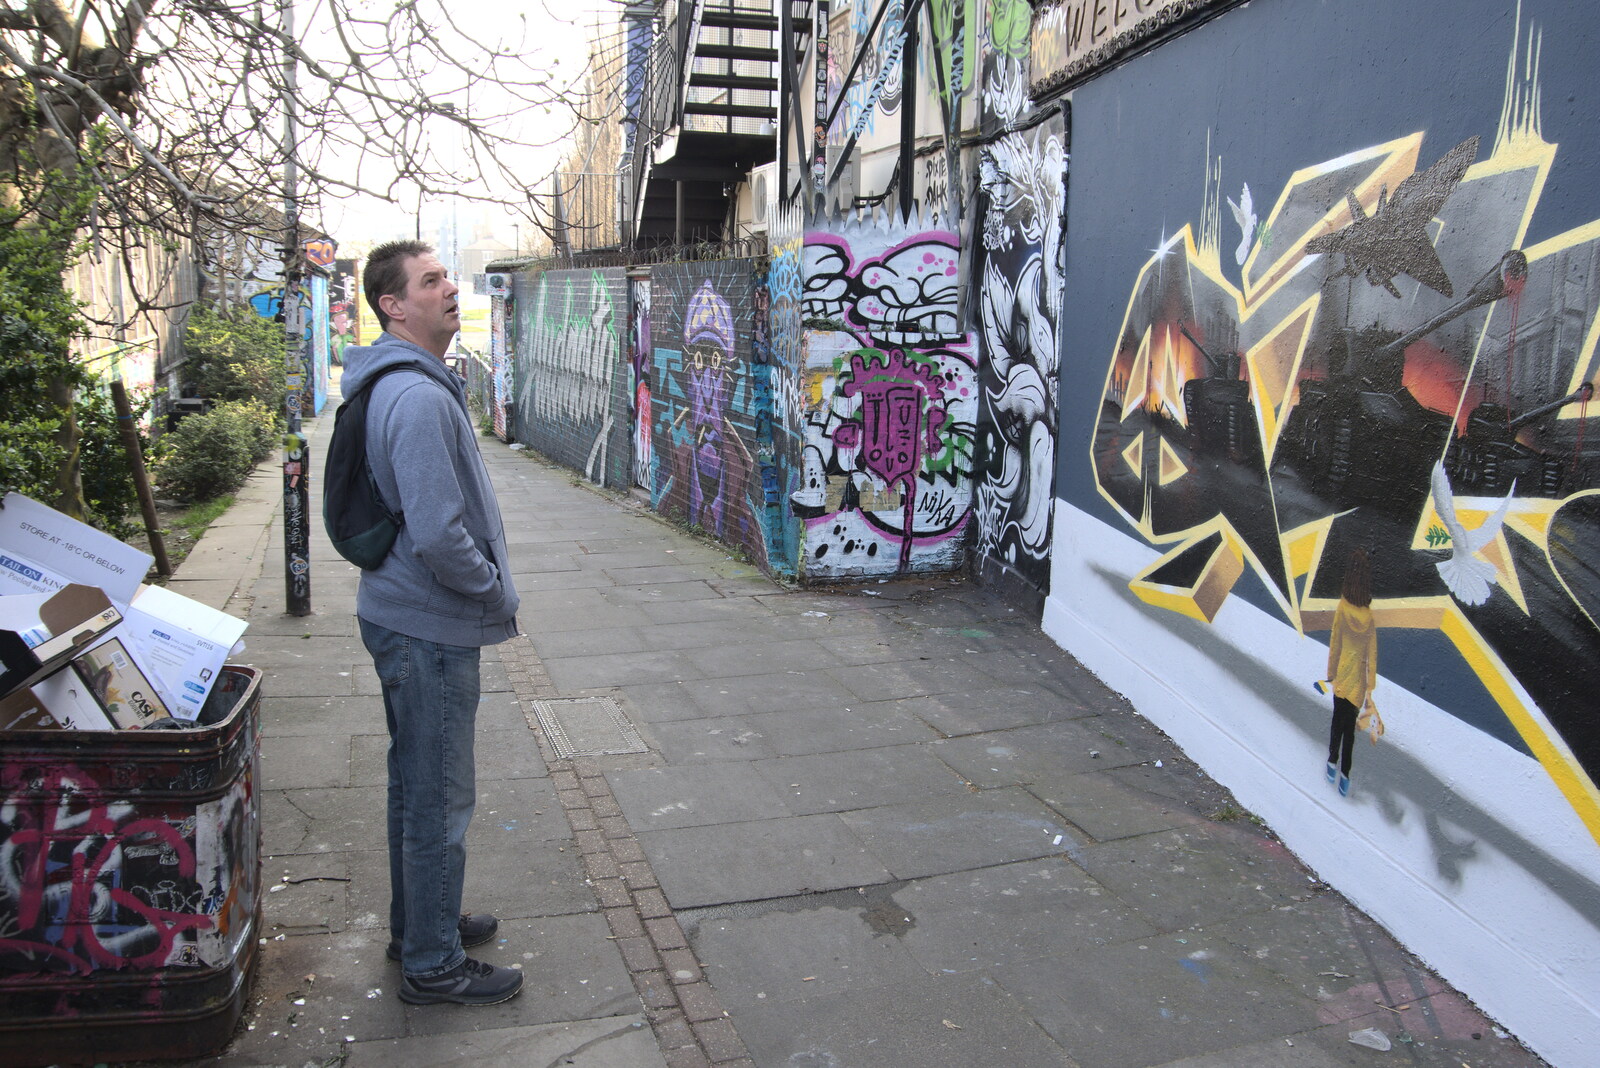 A Walk Around the South Bank, London - 25th March 2022: Sean looks up at some wall art